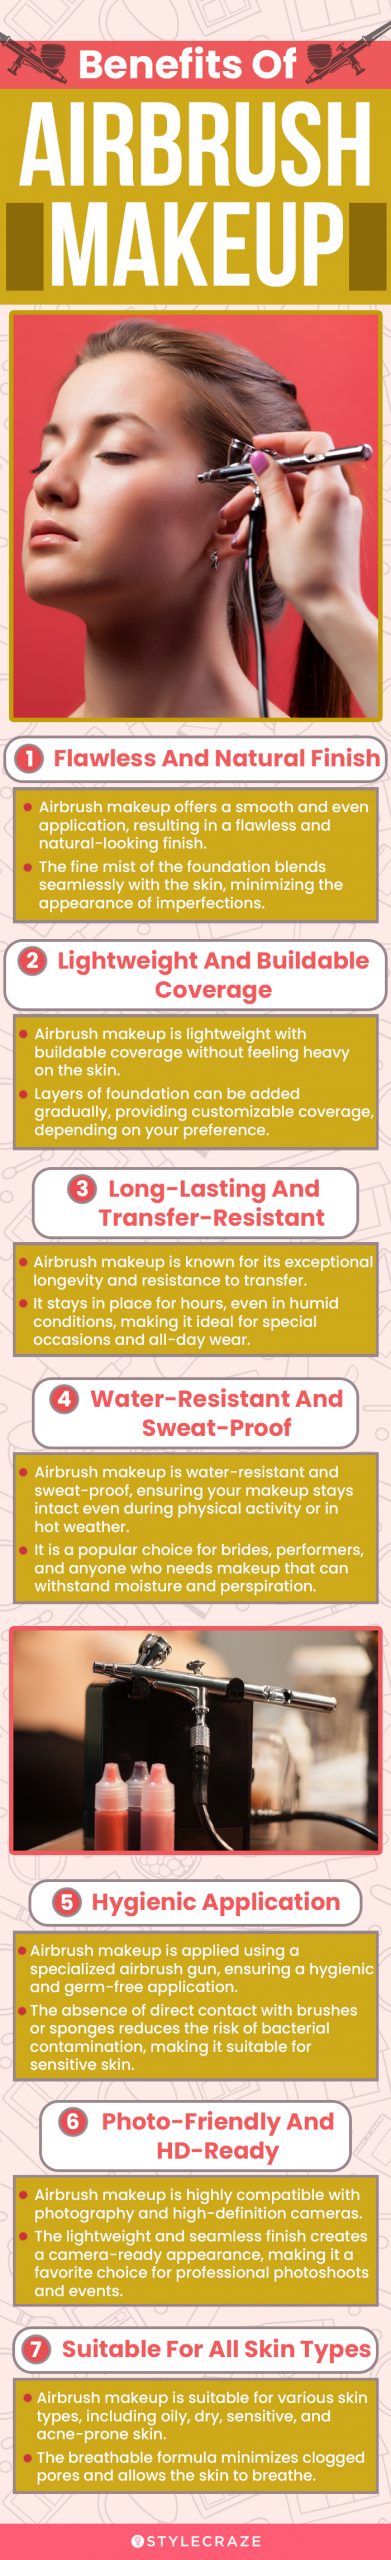 Benefits Of Airbrush Makeup (infographic)